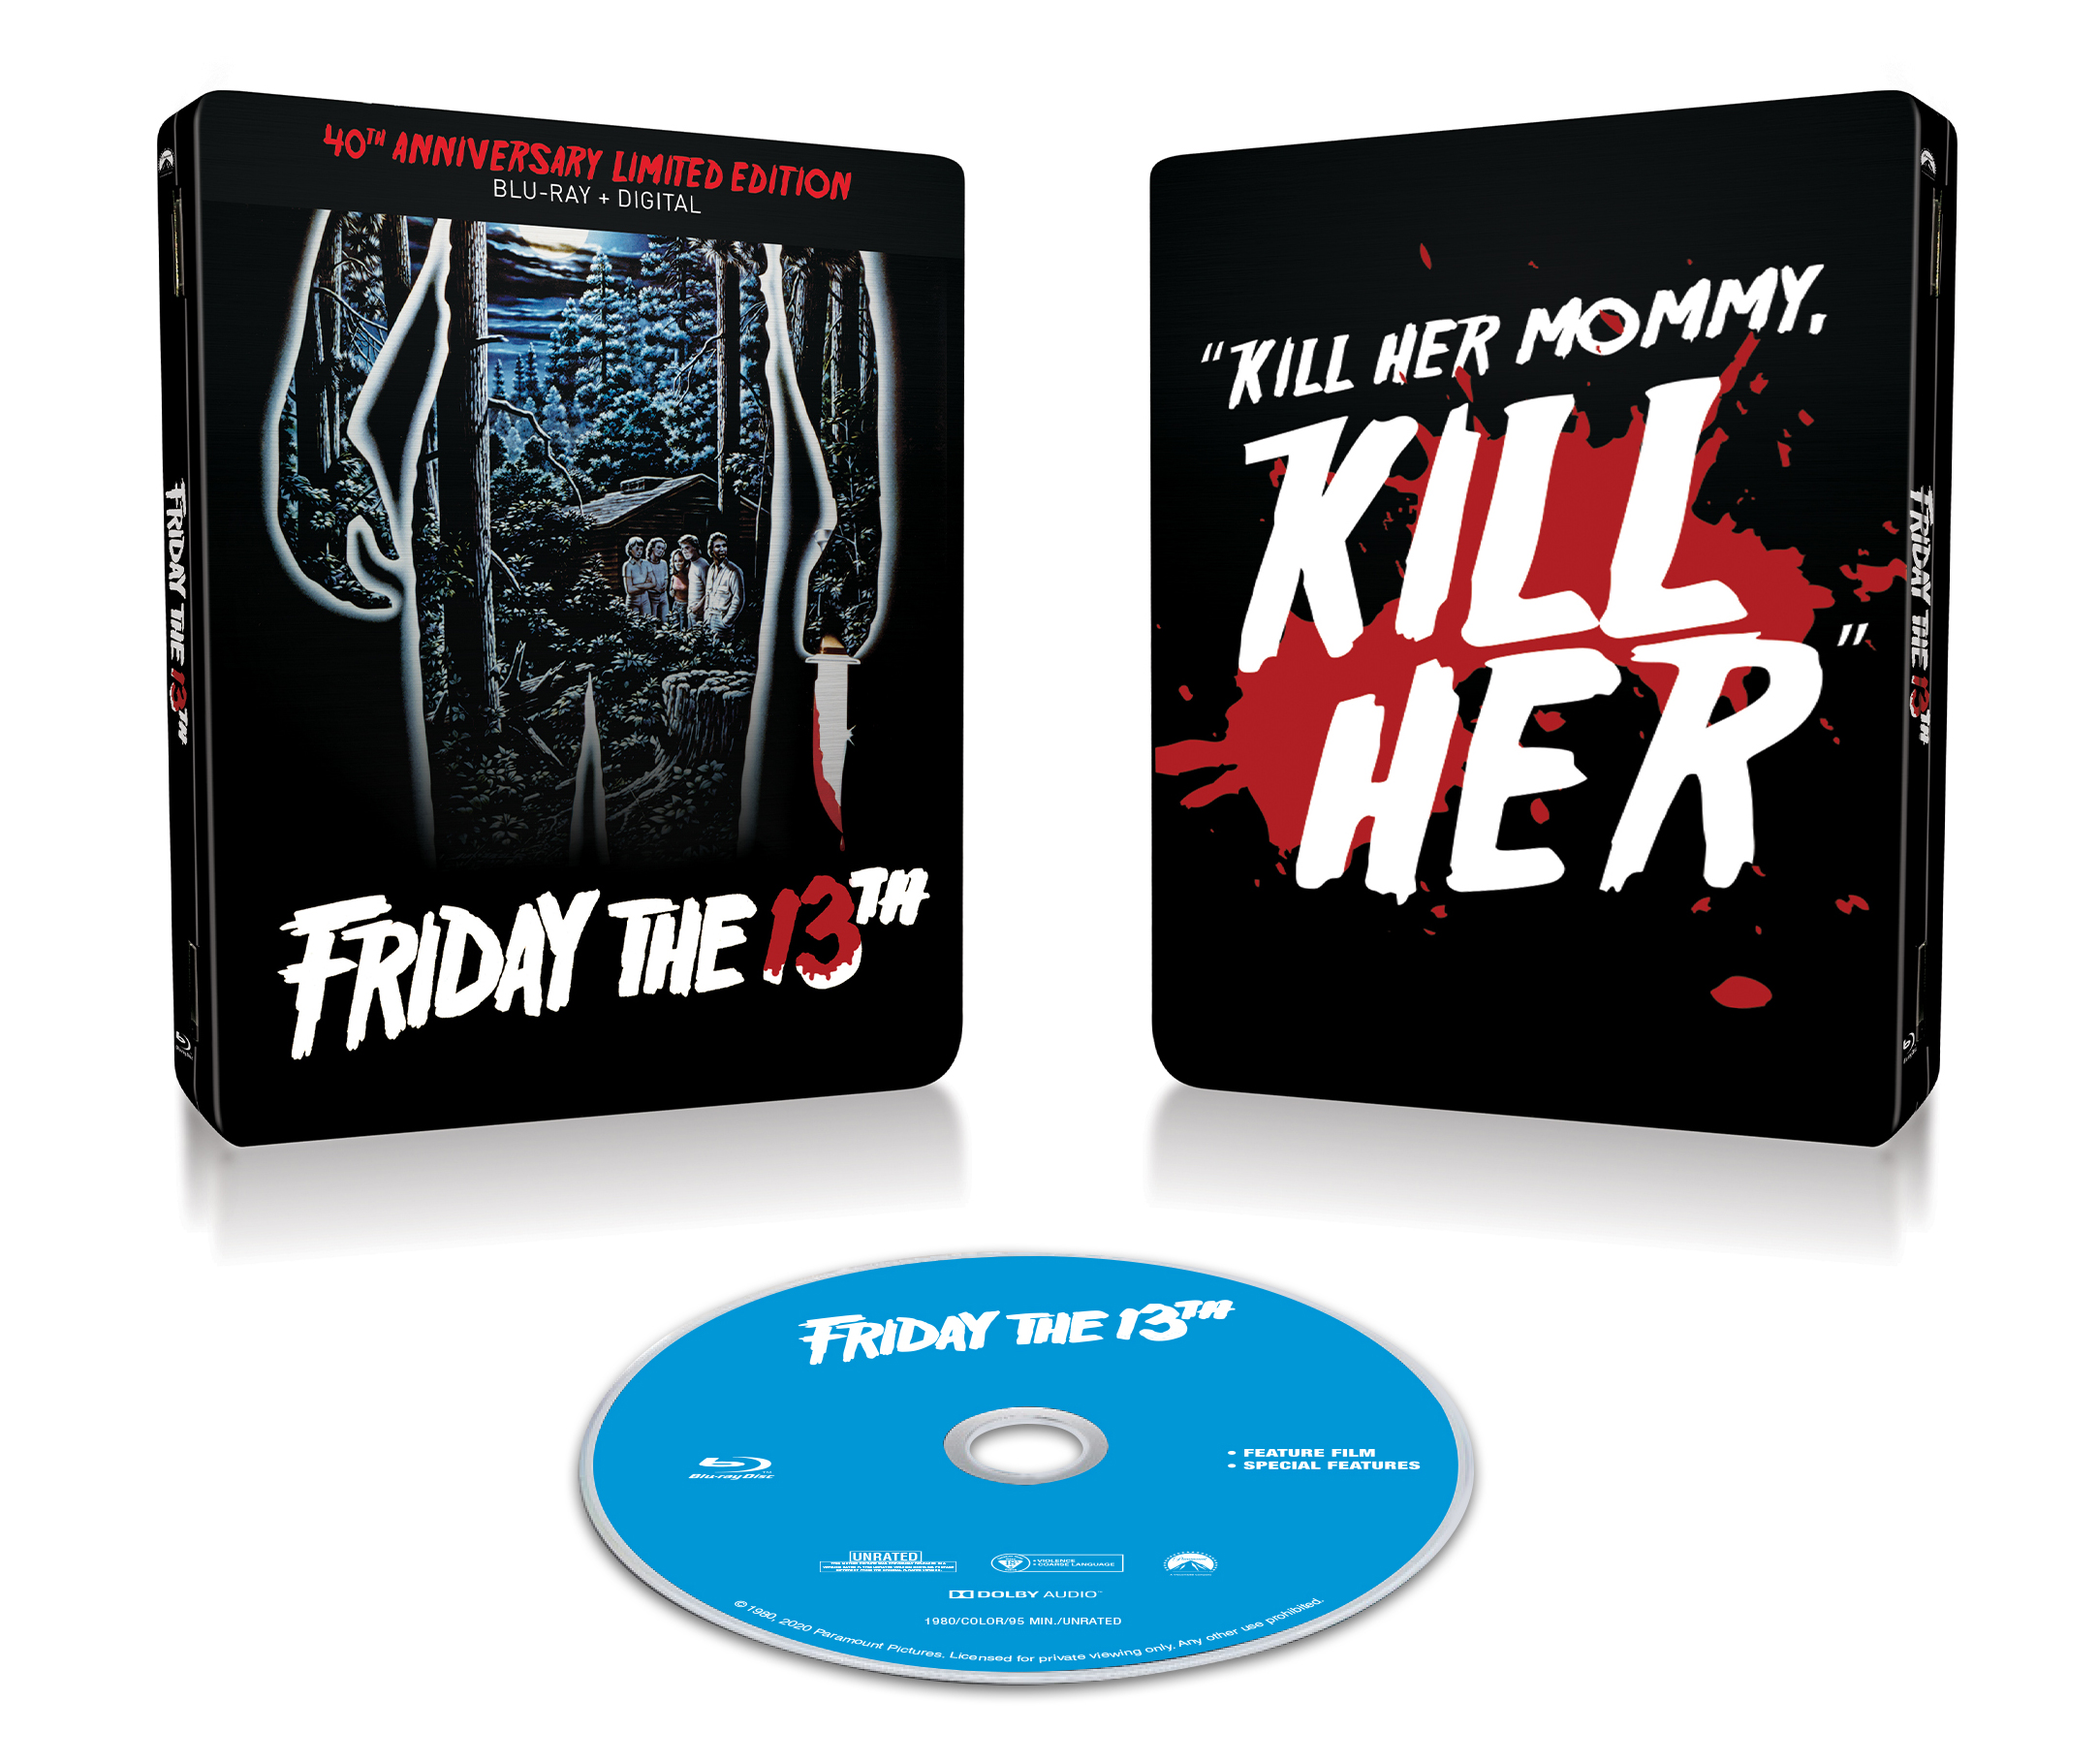 New Limited Edition 4k UHD Steelbook Of Friday The 13th 1980